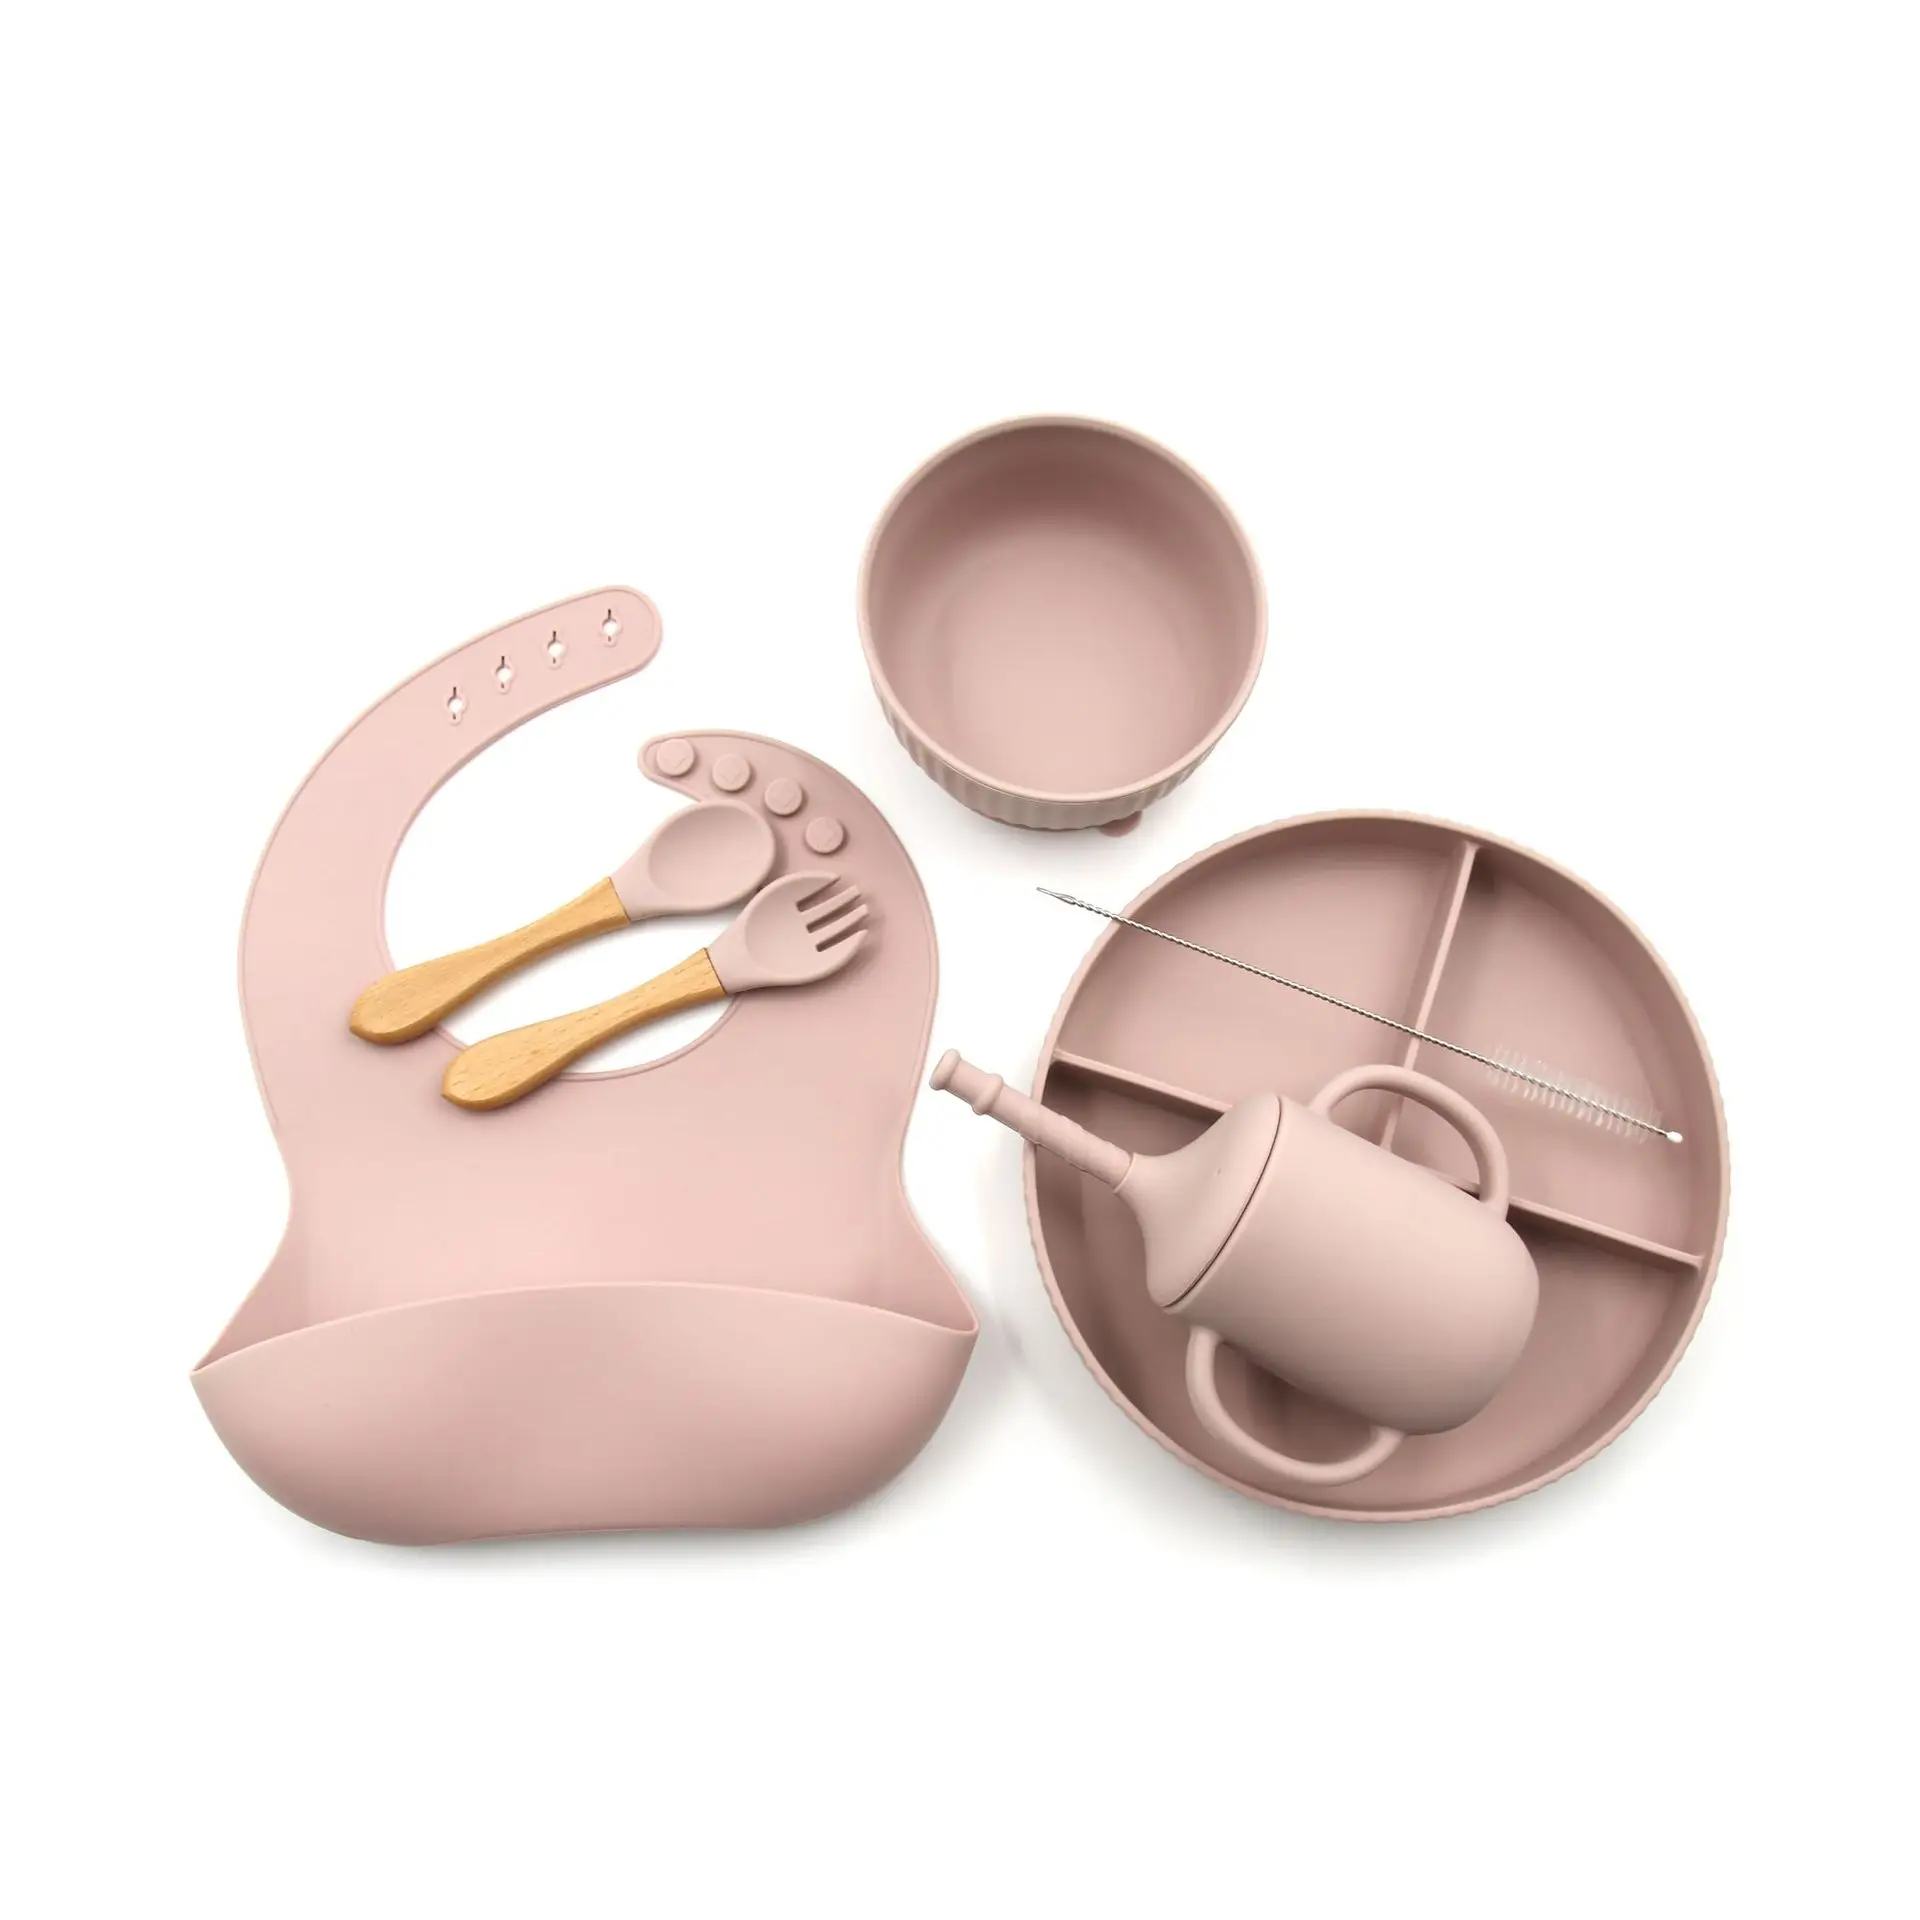 

Hot sales Baby Silicone Essential Set 7 in 1 Silicone Plate and Lid Suction Bowl Bib Spoon Fork Cup Dropshipping, Many